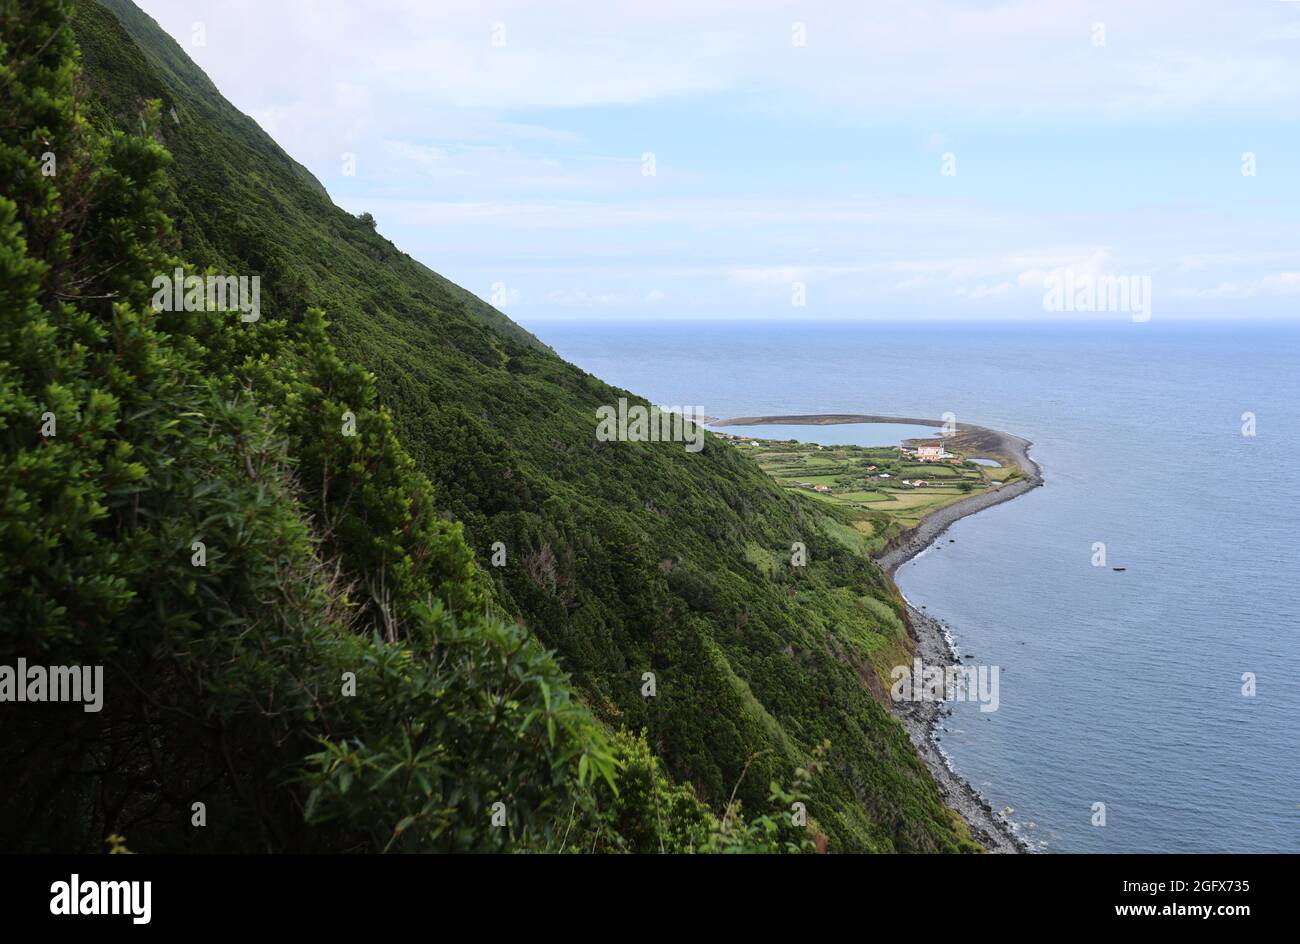 Typical landscape of the island of Sao Jorge in the Azores archipelago Stock Photo